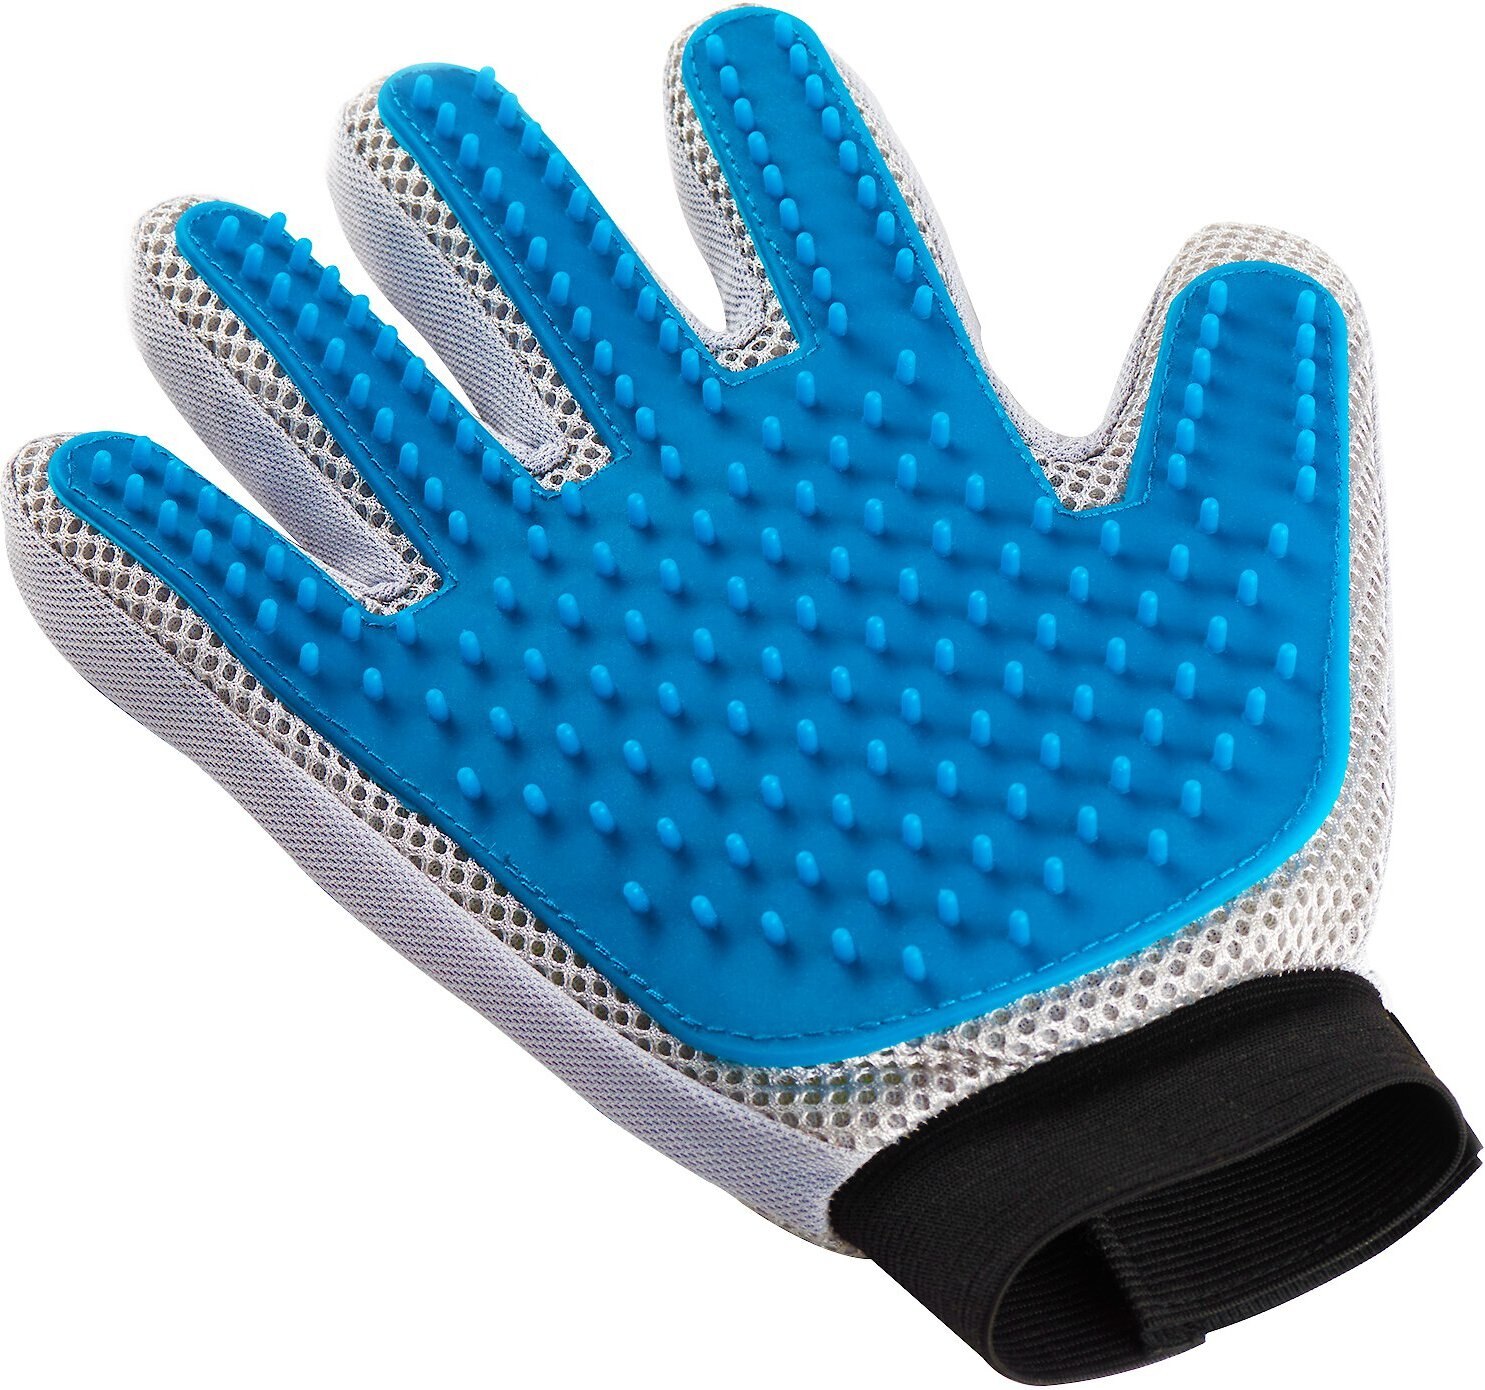 PAT YOUR PET Five Finger Grooming Glove - Chewy.com